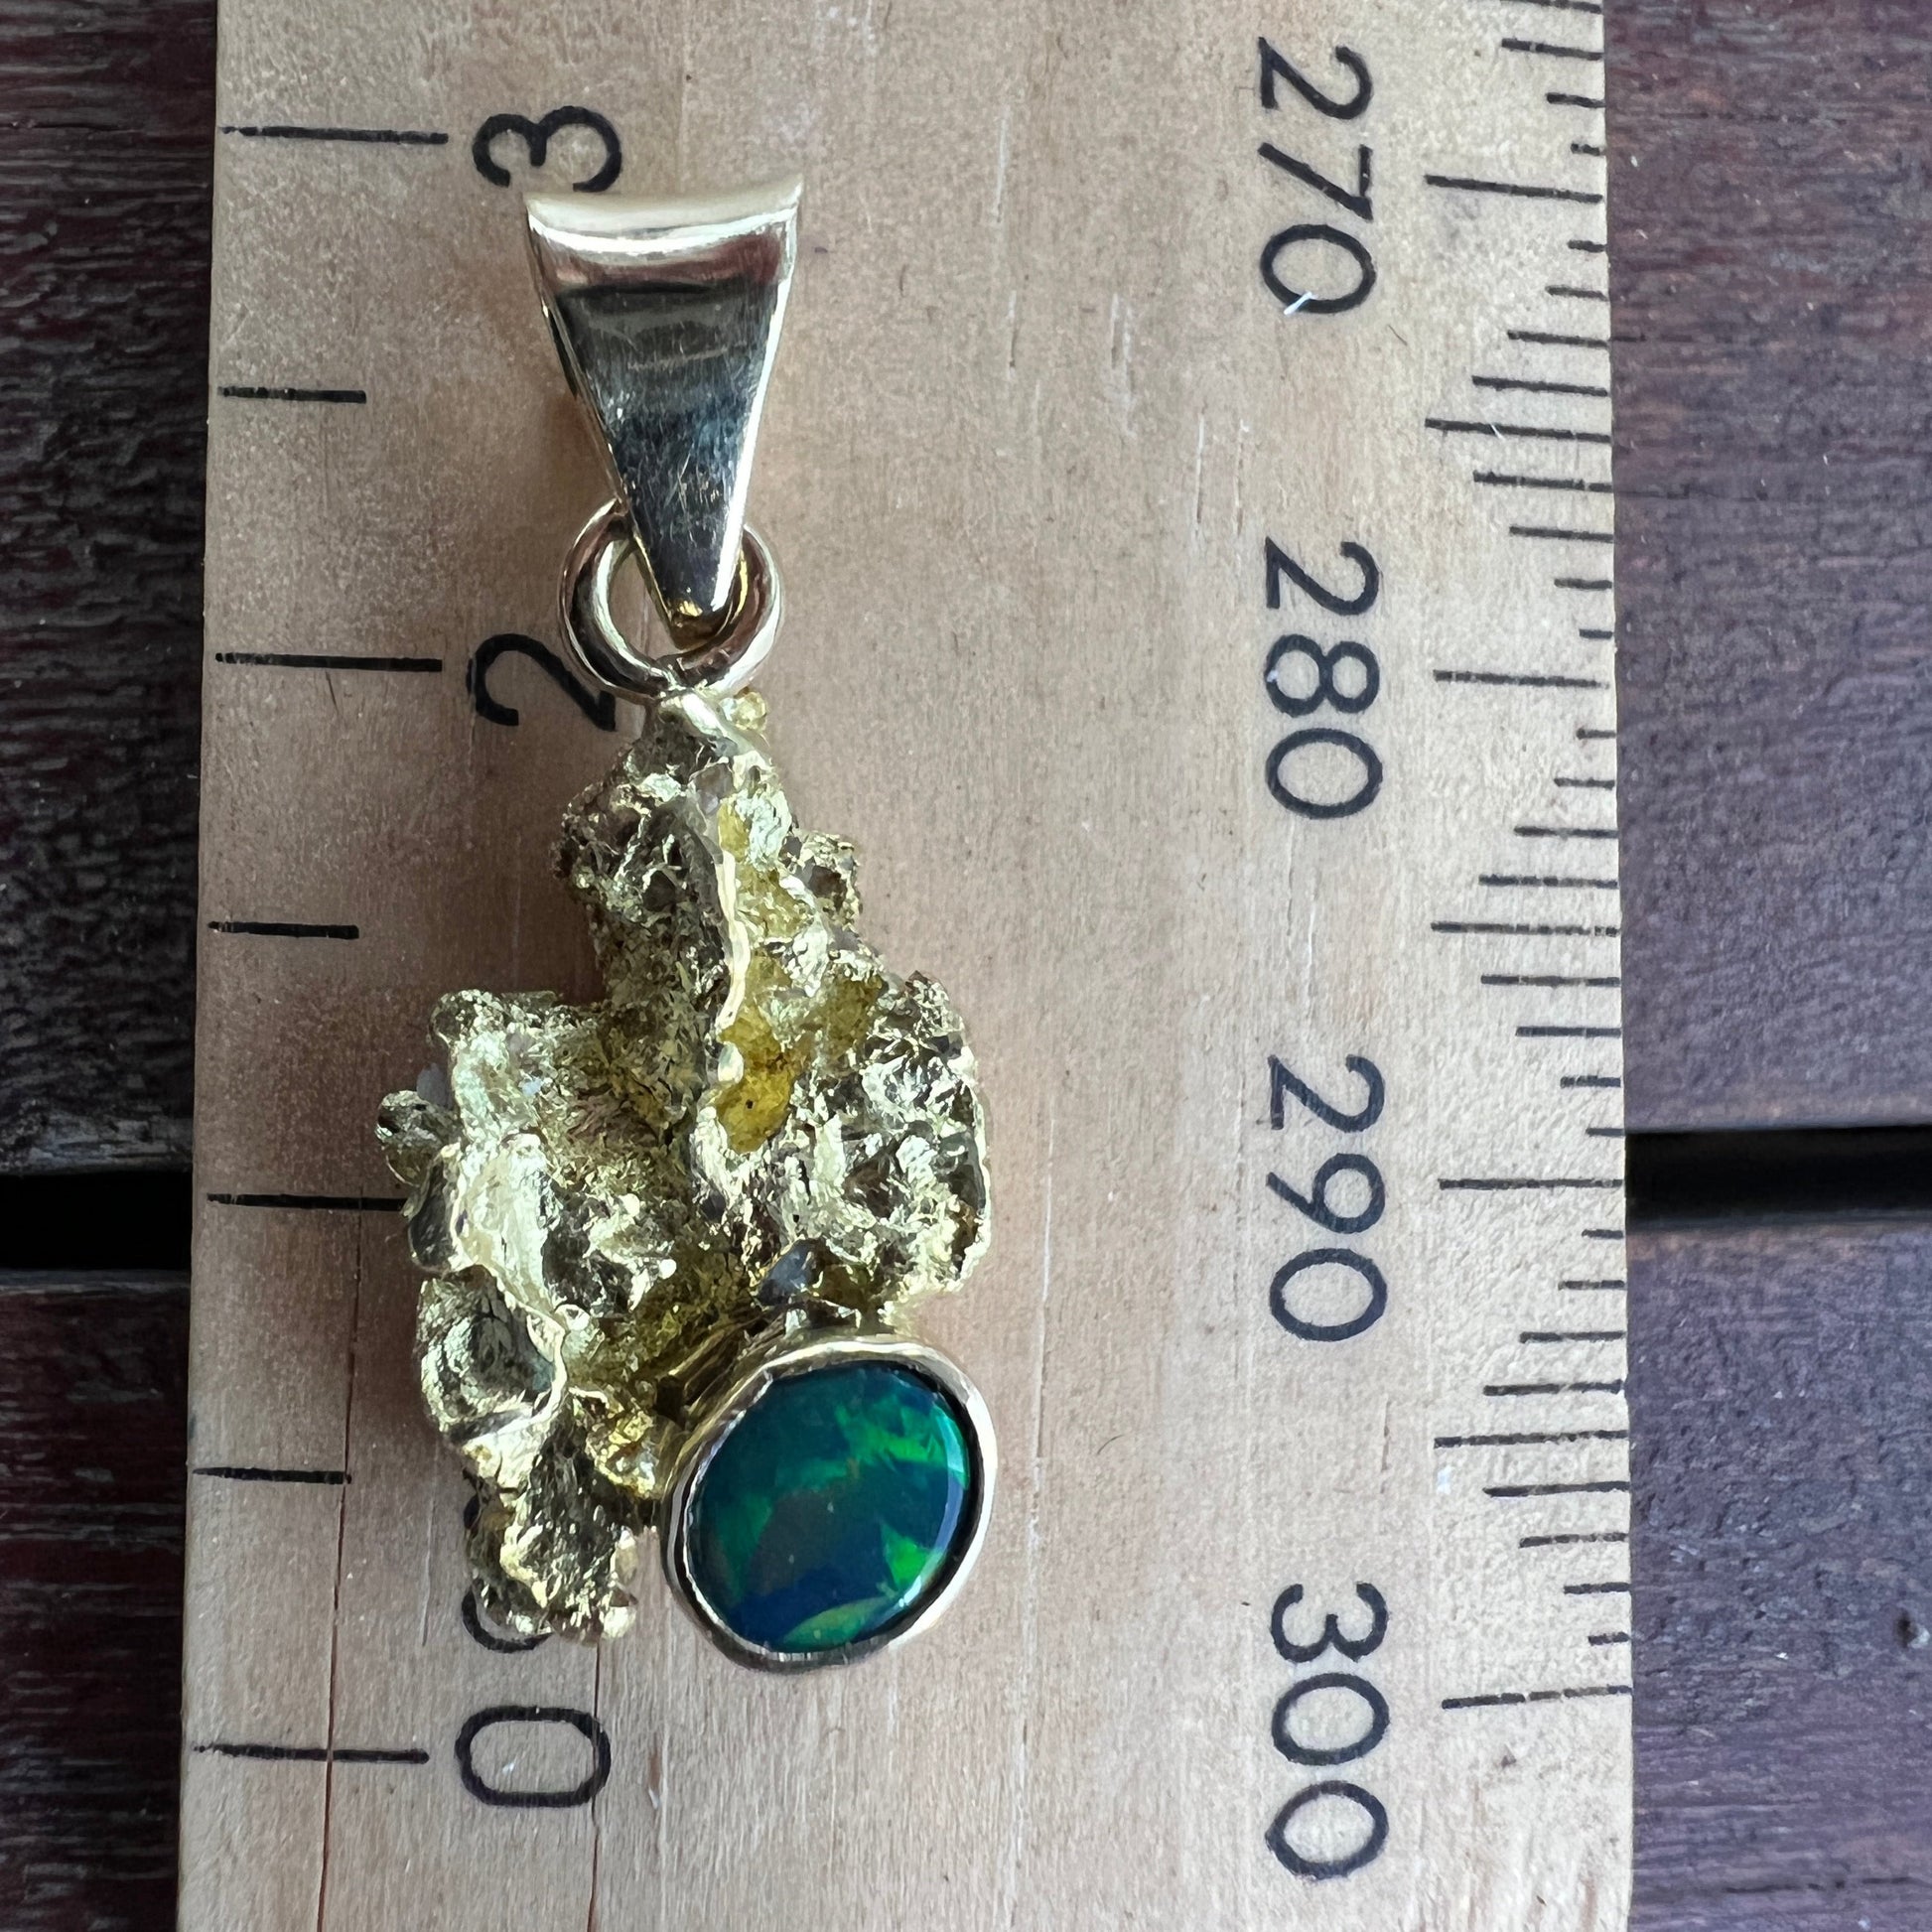 Pure solid gold nugget pendant from Western Australia. Perfectly set with an 18ct bale. Set with a beautifully cut black opal from Lightning Ridge.